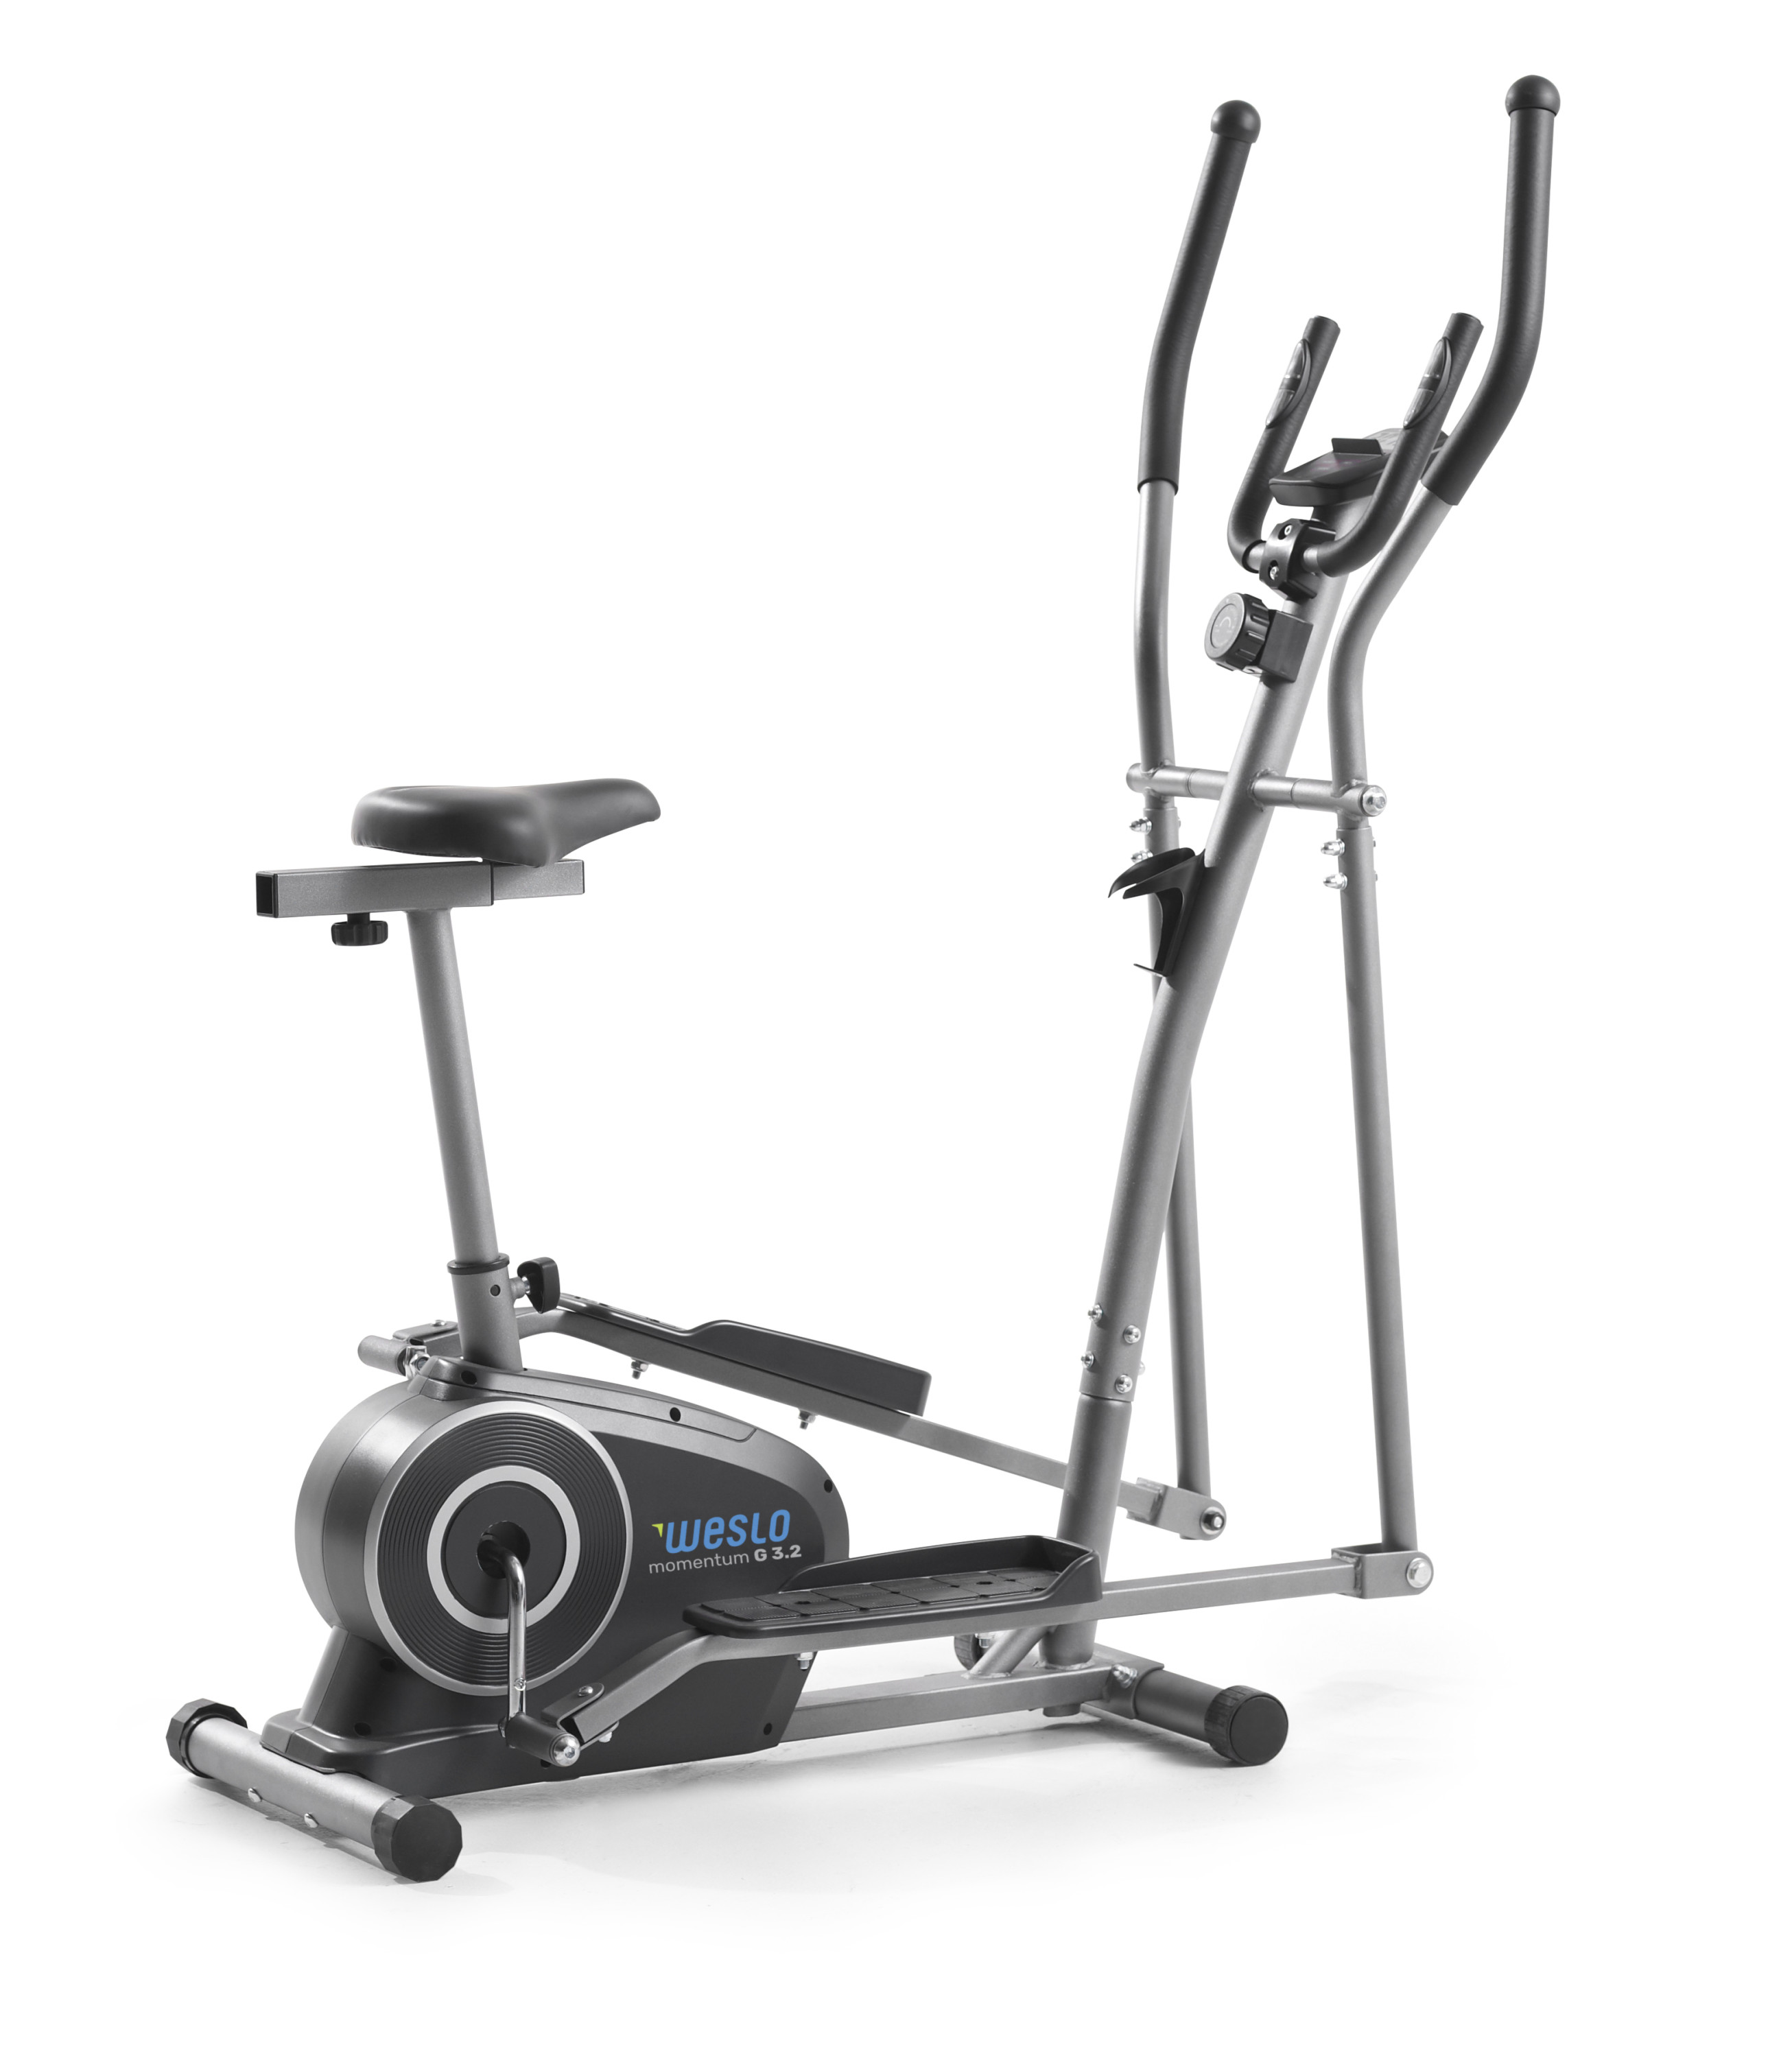 Weslo Momentum G 3.2 Bike and Elliptical Hybrid Trainer with LCD Window Display and 250 lb. Weight Capacity - image 4 of 14